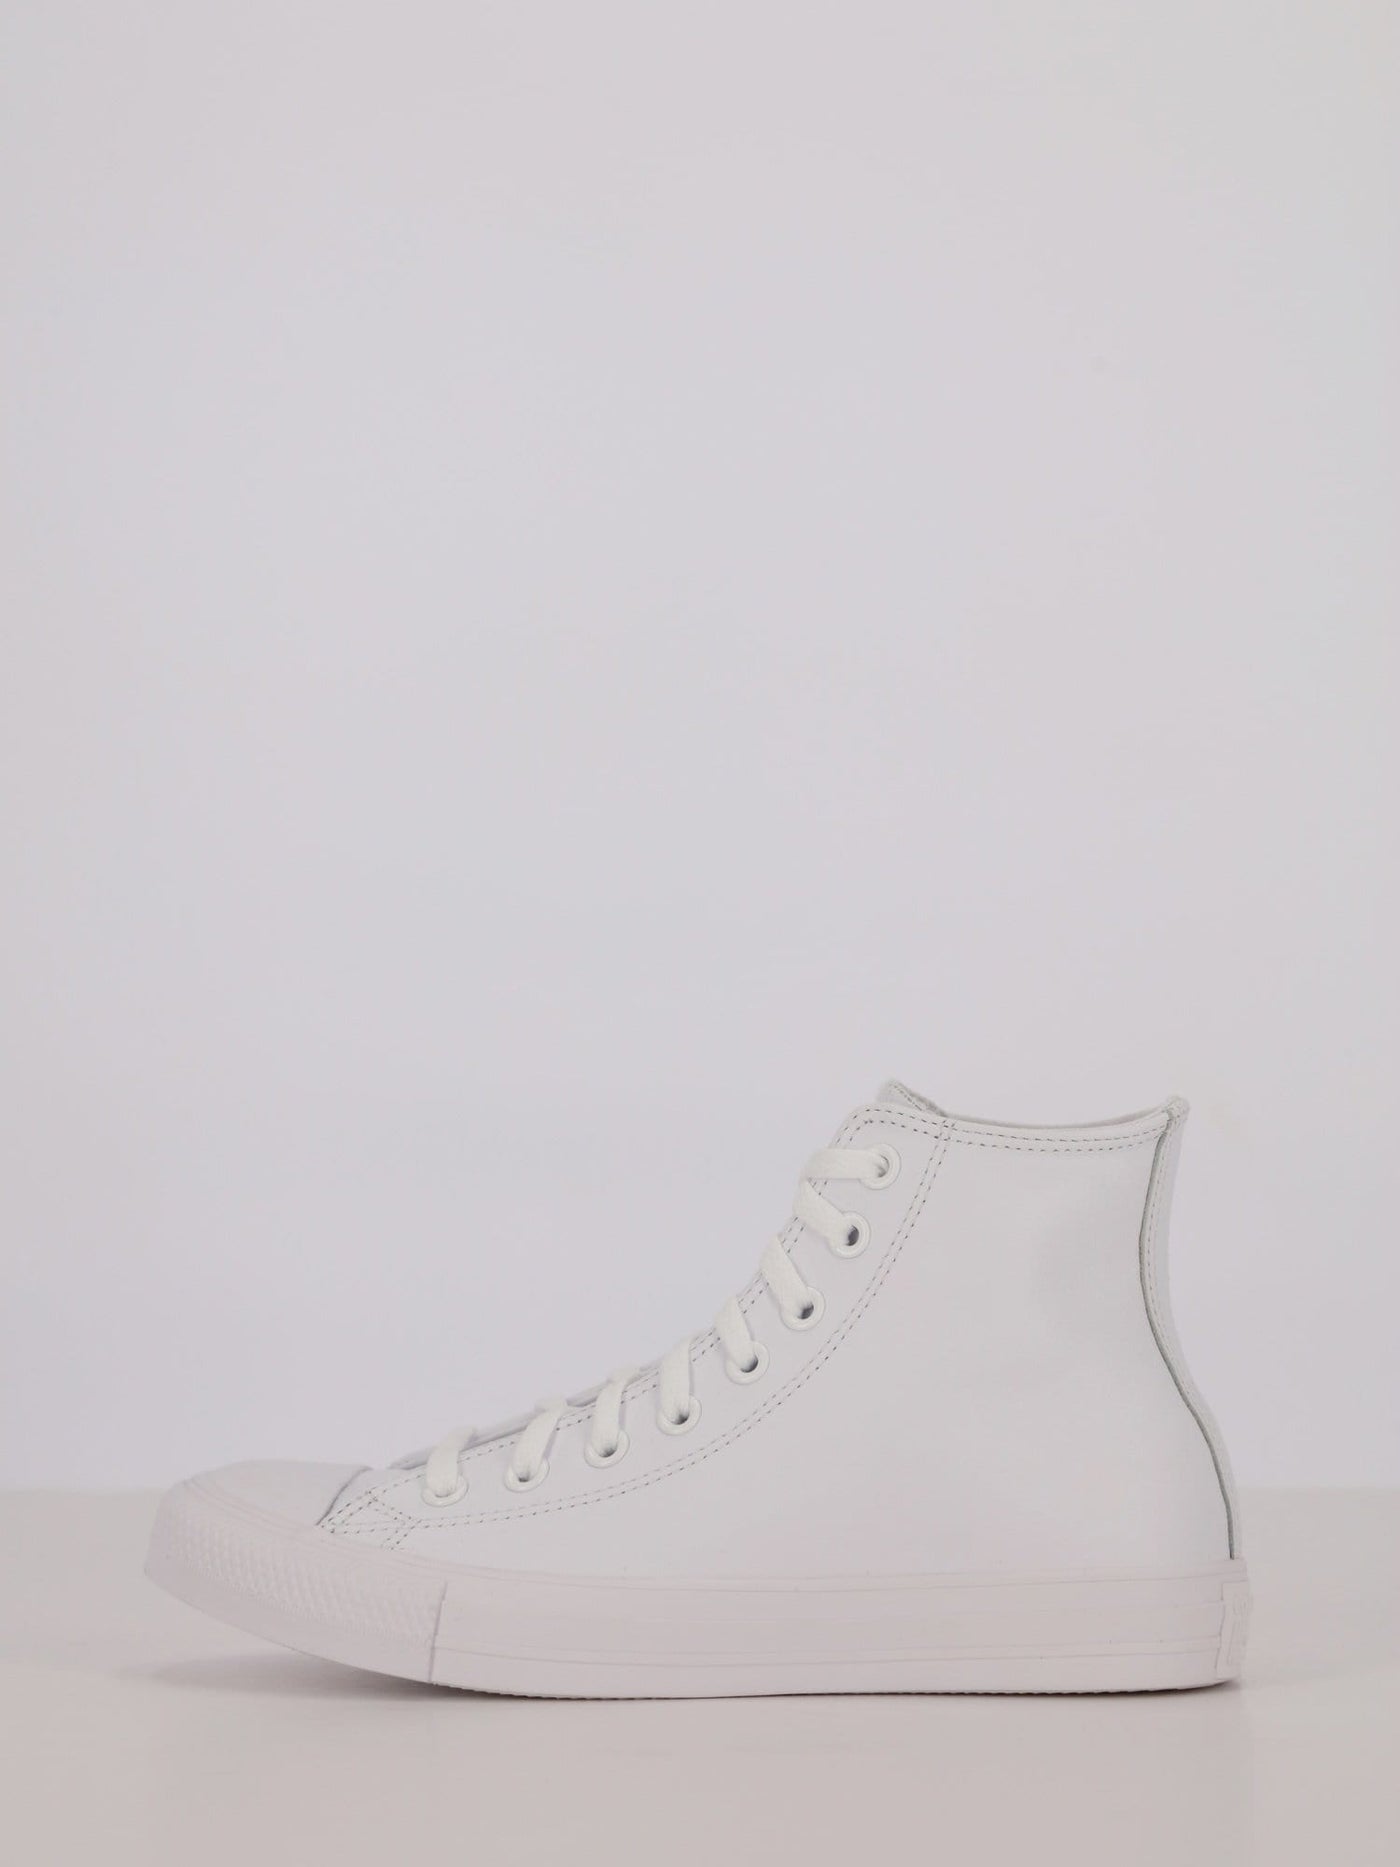 Converse Sneakers Chuck Taylor All Star Mono Leather Unisex Sneakers